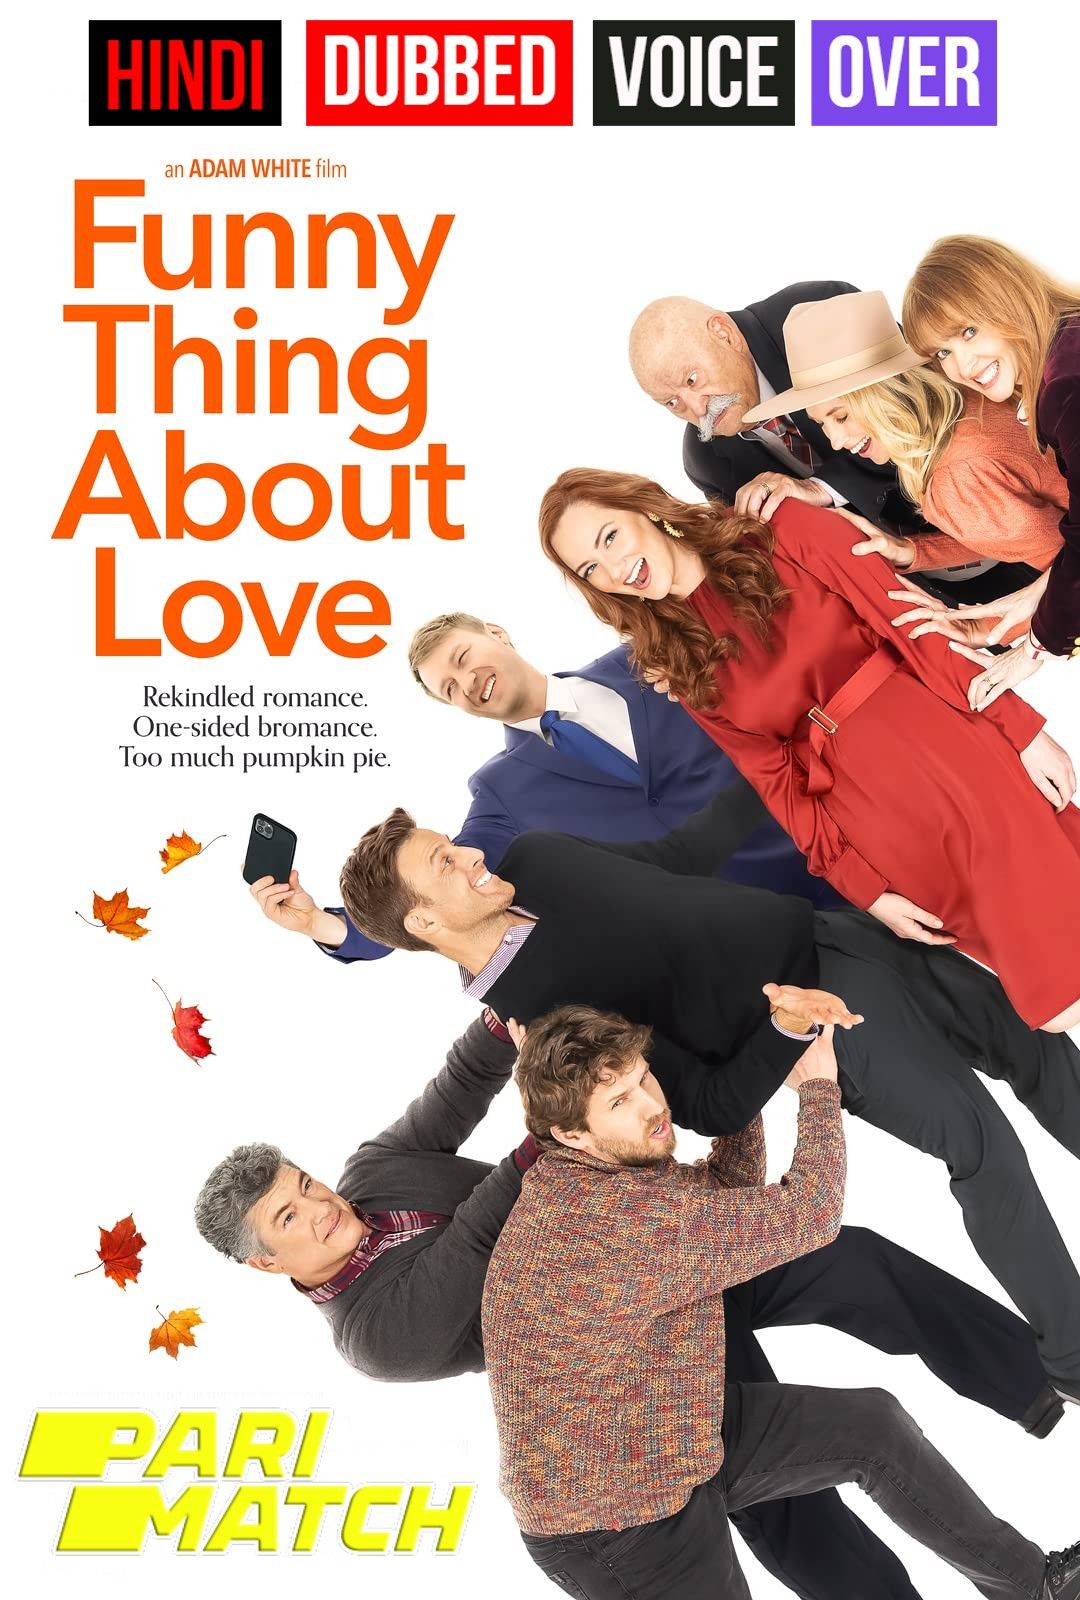 Funny Thing About Love (2021) Hindi (Voice Over) Dubbed WEBRip download full movie